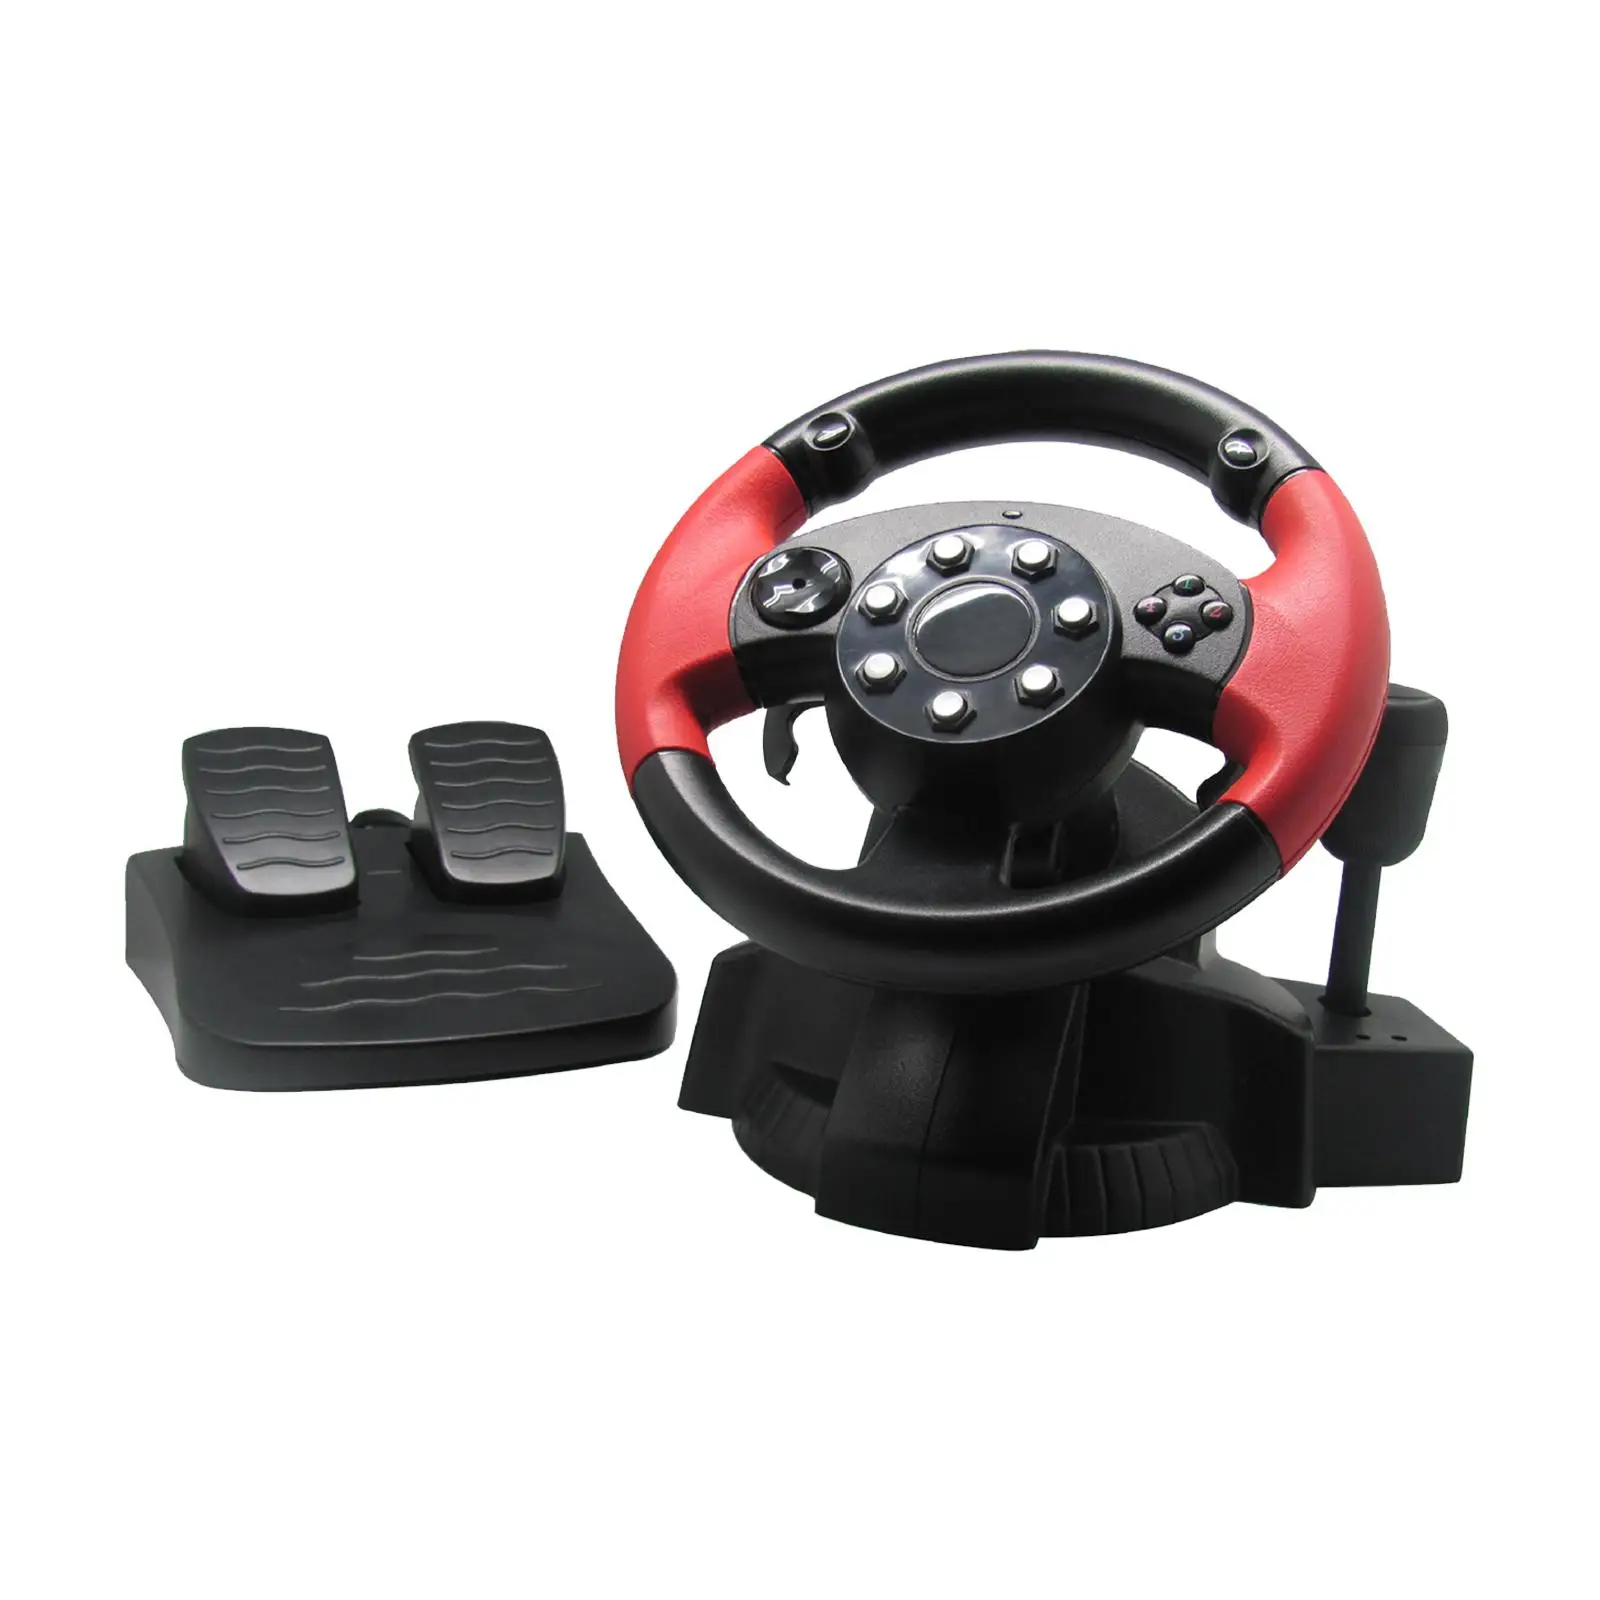 Racing Driving Wheel with Pedals and Shifter Game Racing Wheel Controller Wired Gaming Accessories Universal Pc Wheel